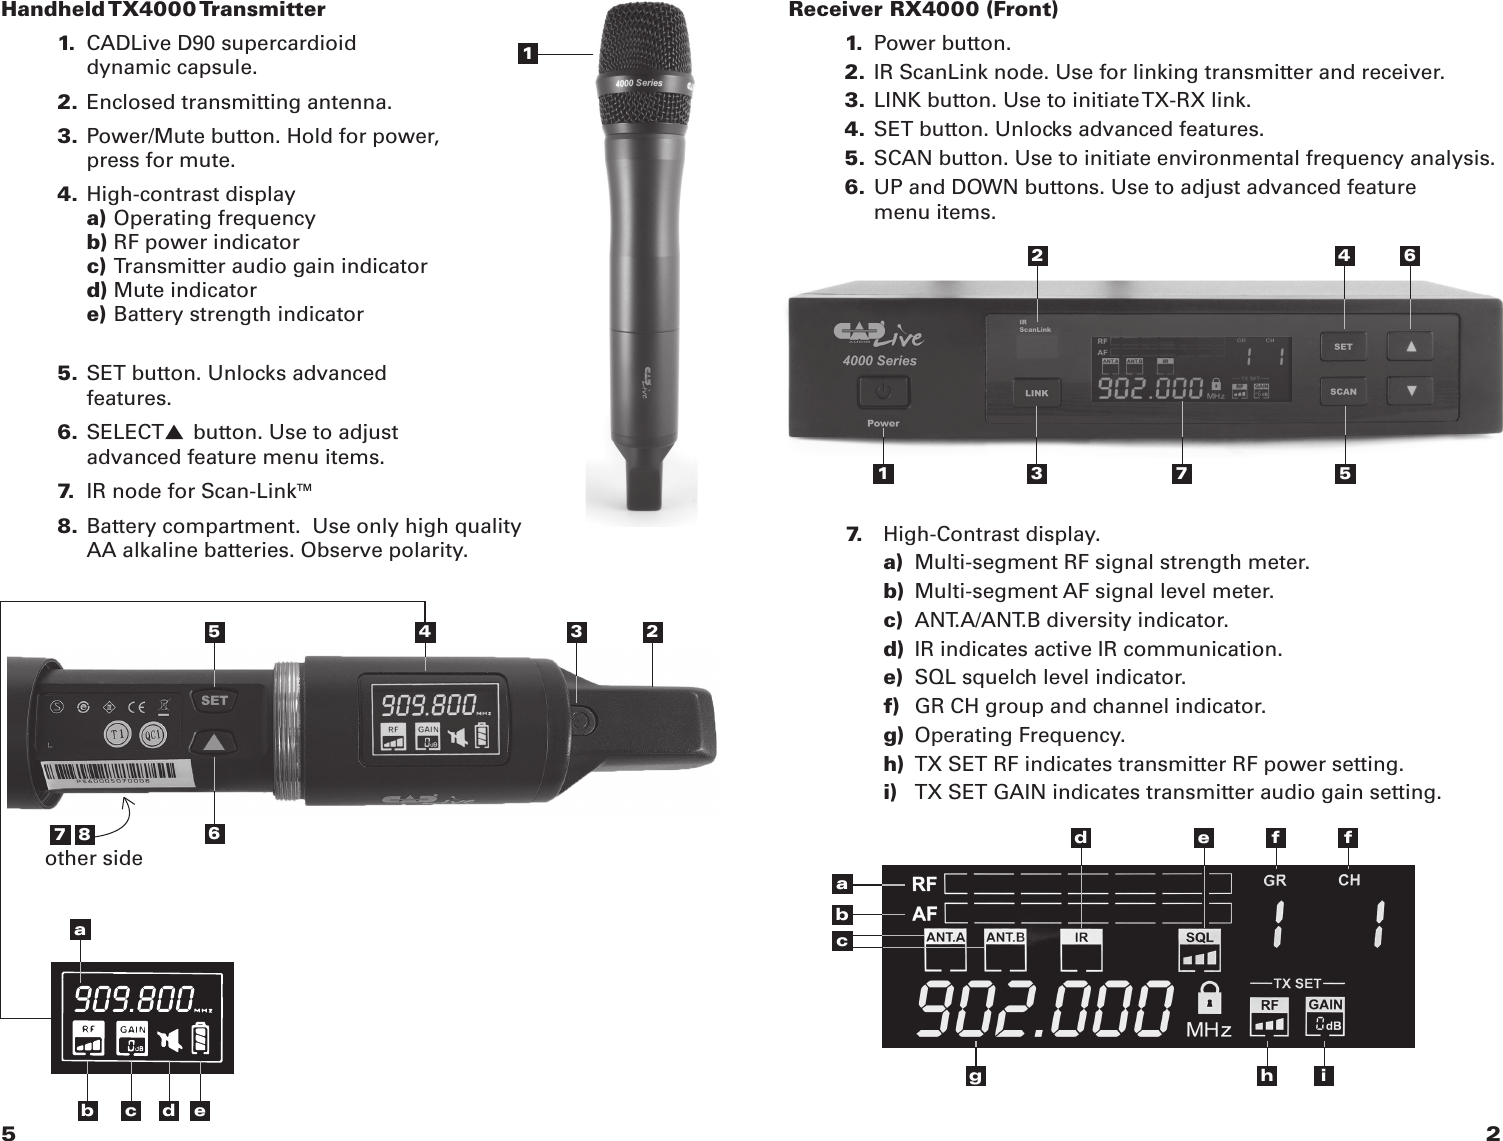 2Handheld TX4000 Transmitter  1.  CADLive D90 supercardioid        dynamic capsule.  2. Enclosed transmitting antenna.  3. Power/Mute button. Hold for power,        press for mute.  4. High-contrast display     a) Operating frequency     b) RF power indicator     c) Transmitter audio gain indicator     d) Mute indicator     e) Battery strength indicator    5. SET button. Unlocks advanced       features.    6. SELECT     button. Use to adjust        advanced feature menu items.  7.  IR node for Scan-LinkTM  8. Battery compartment.  Use only high quality        AA alkaline batteries. Observe polarity.    125748other sideab c d e36Receiver RX4000 (Front) 1.  Power button. 2. IR ScanLink node. Use for linking transmitter and receiver.  3. LINK button. Use to initiate TX-RX link. 4. SET button. Unlocks advanced features. 5. SCAN button. Use to initiate environmental frequency analysis. 6. UP and DOWN buttons. Use to adjust advanced feature      menu items.1 72 436 7.  High-Contrast display.  a)  Multi-segment RF signal strength meter.  b)  Multi-segment AF signal level meter.  c)  ANT.A/ANT.B diversity indicator.   d)  IR indicates active IR communication.  e)  SQL squelch level indicator.  f)  GR CH group and channel indicator.  g)  Operating Frequency.  h)  TX SET RF indicates transmitter RF power setting.  i)  TX SET GAIN indicates transmitter audio gain setting.gabd ecf fh i55